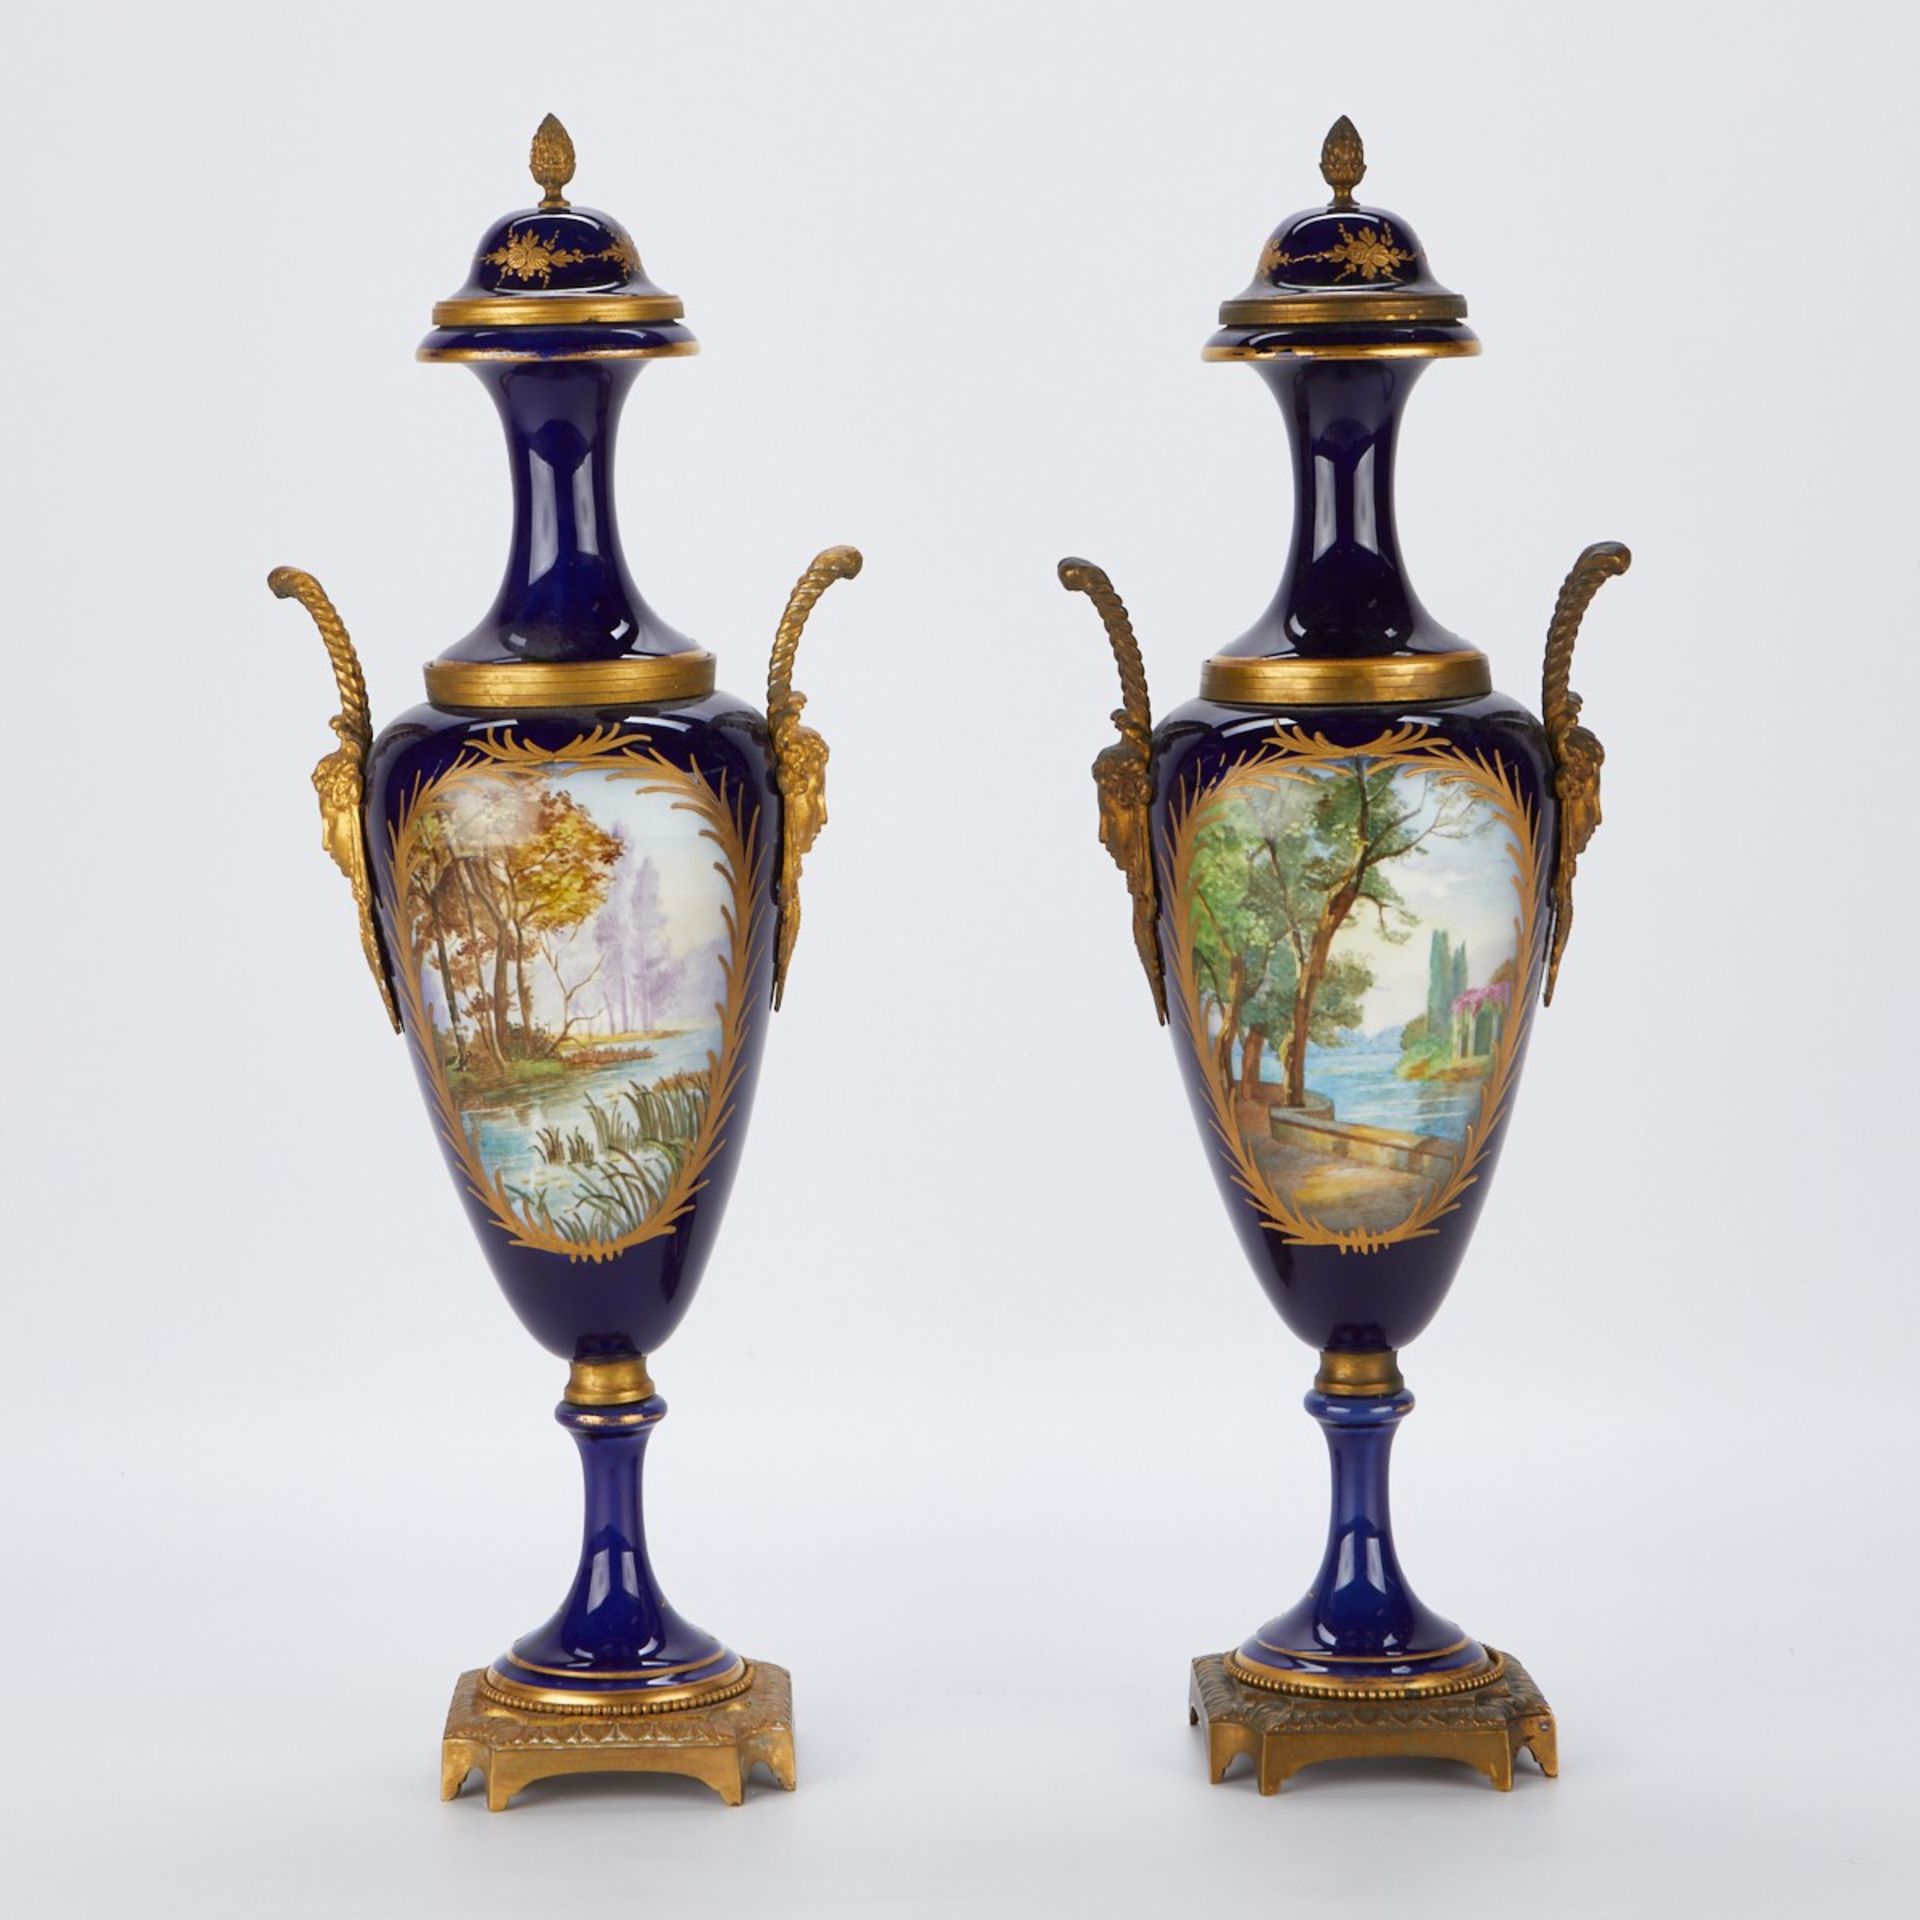 Pair of French Sevres Style Urns w/ Mask Handles - Image 4 of 8